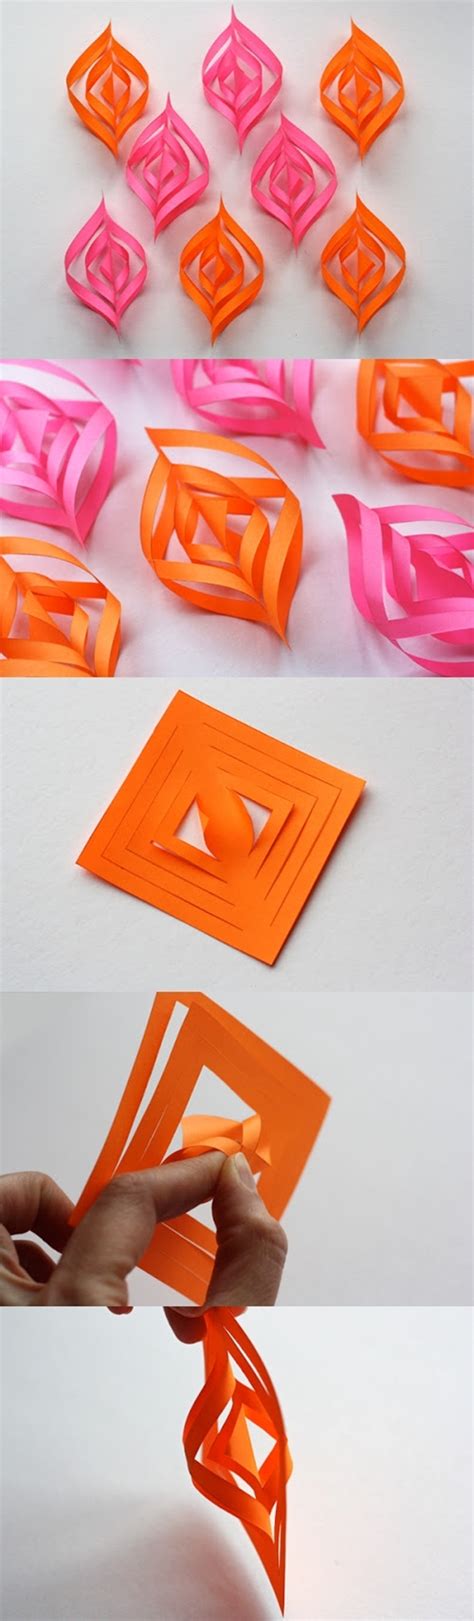 45 Simple Origami Crafts For Kids To Enhance Their Creativity Hercottage